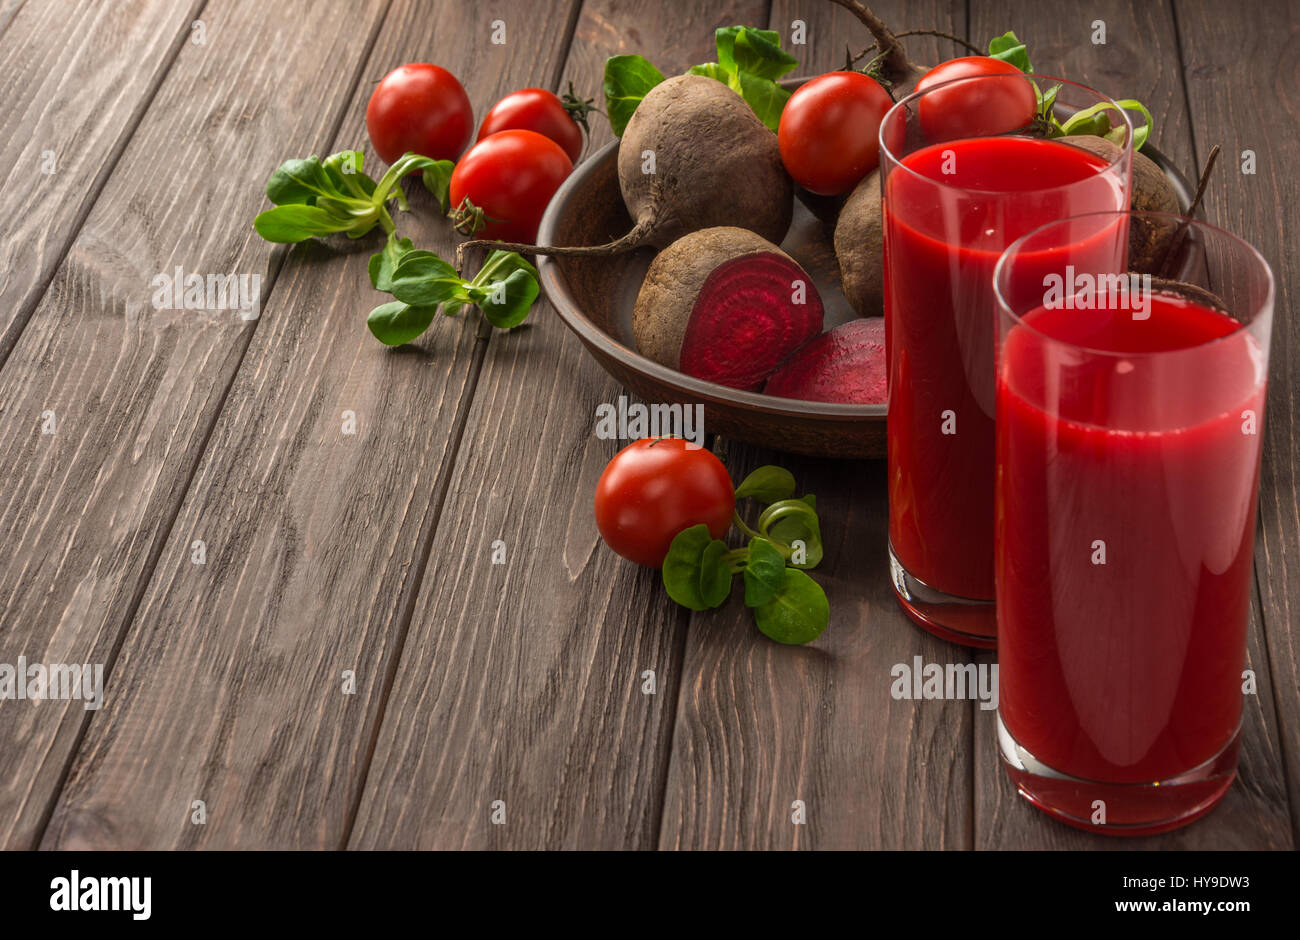 Healthy eating, dieting and vegetarian concept - glass juges of beet-tomato juice with vegetables on dark wooden background . Detox and healthy diet . Stock Photo